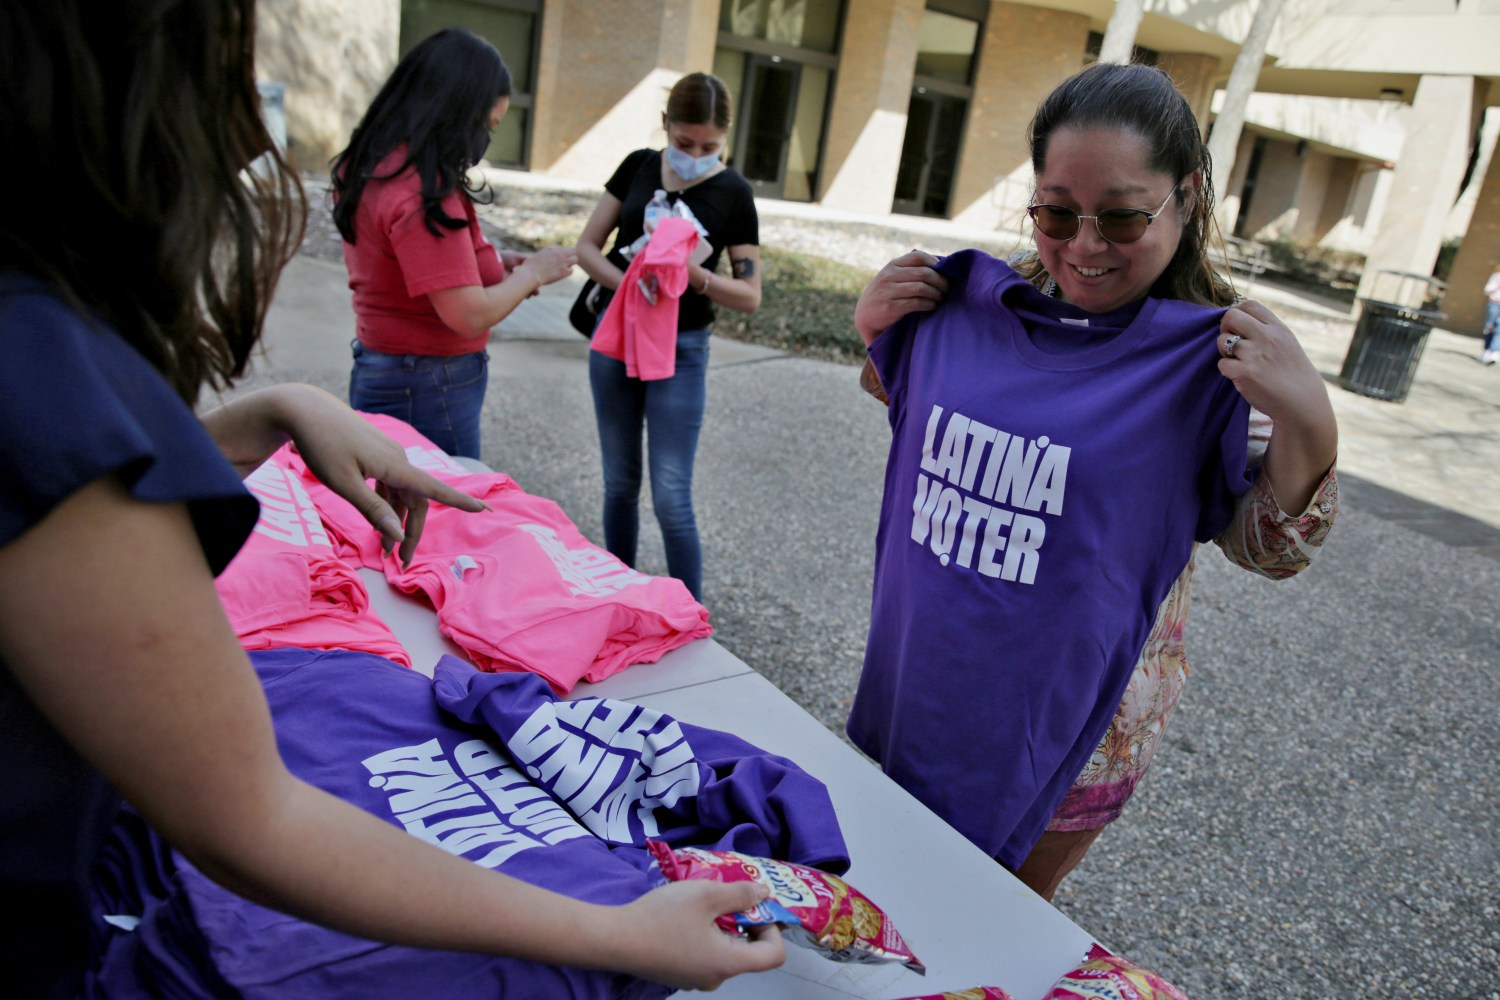 Naomi Martinez looks at a free shirt offered by Hey Chica!, a Latina leadership group empowering Latinas to vote, at the Dallas College Eastfield Campus in the primary election in Dallas, U.S., March 1, 2022.  REUTERS/Shelby Tauber